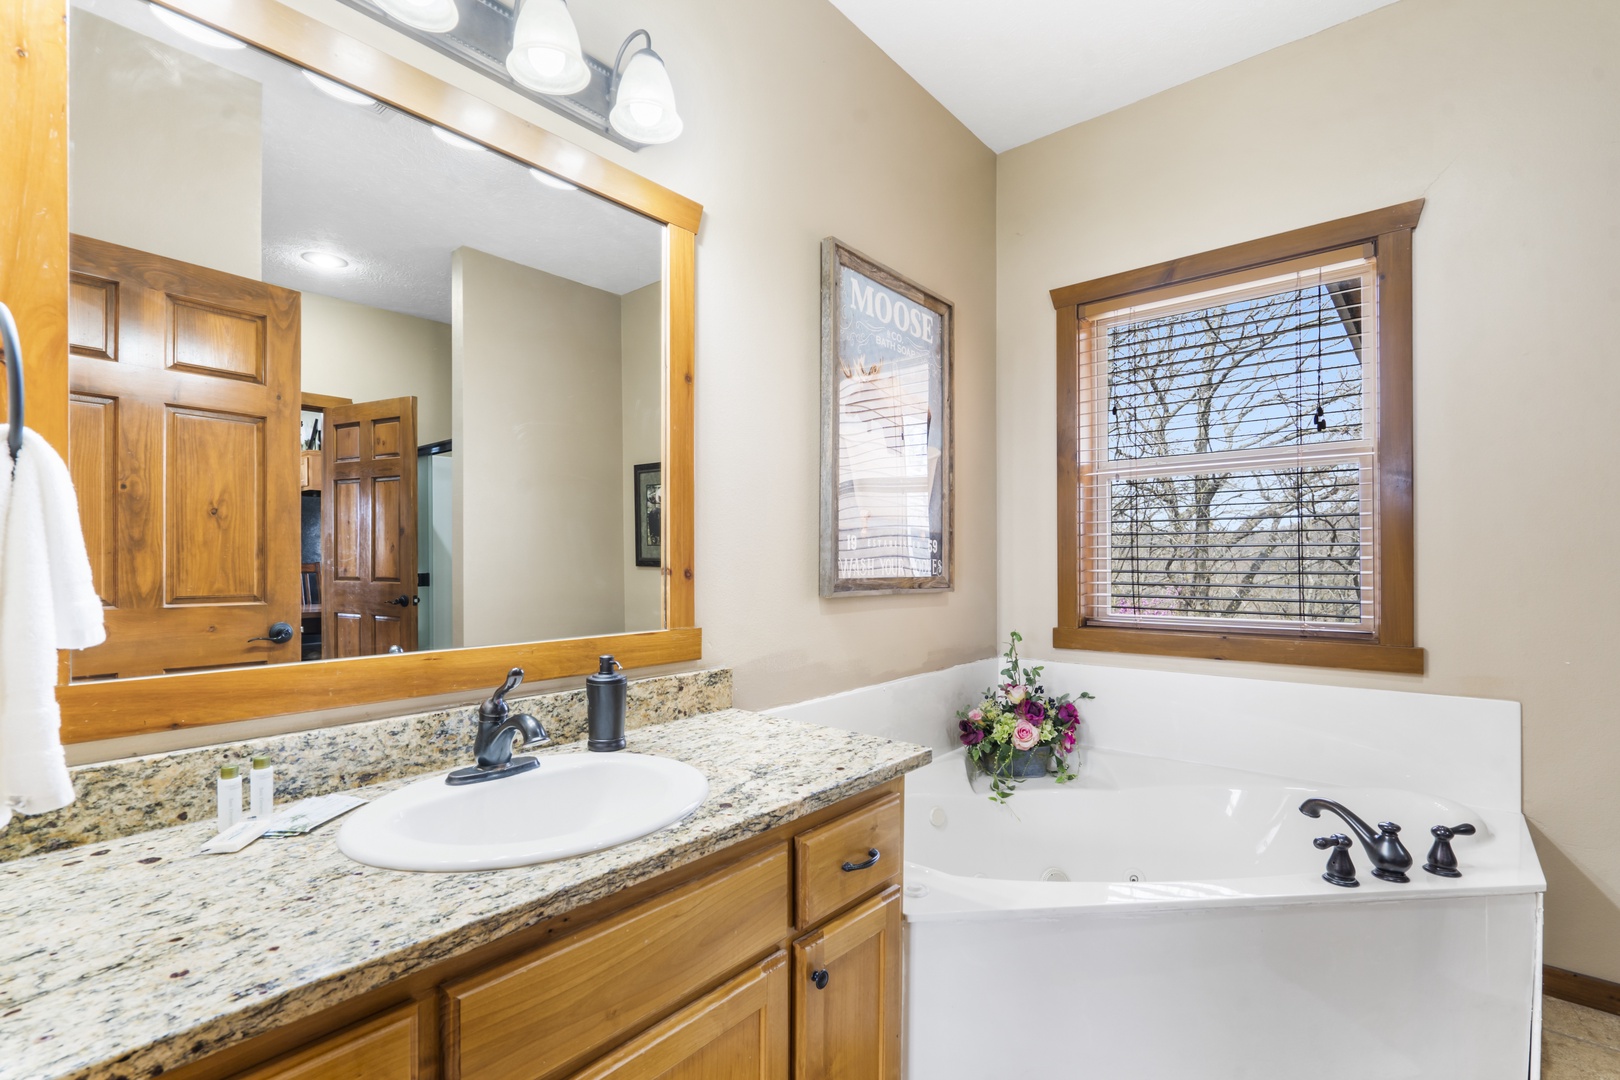 A single vanity, glass shower, & Jacuzzi soaking tub await in this ensuite bath